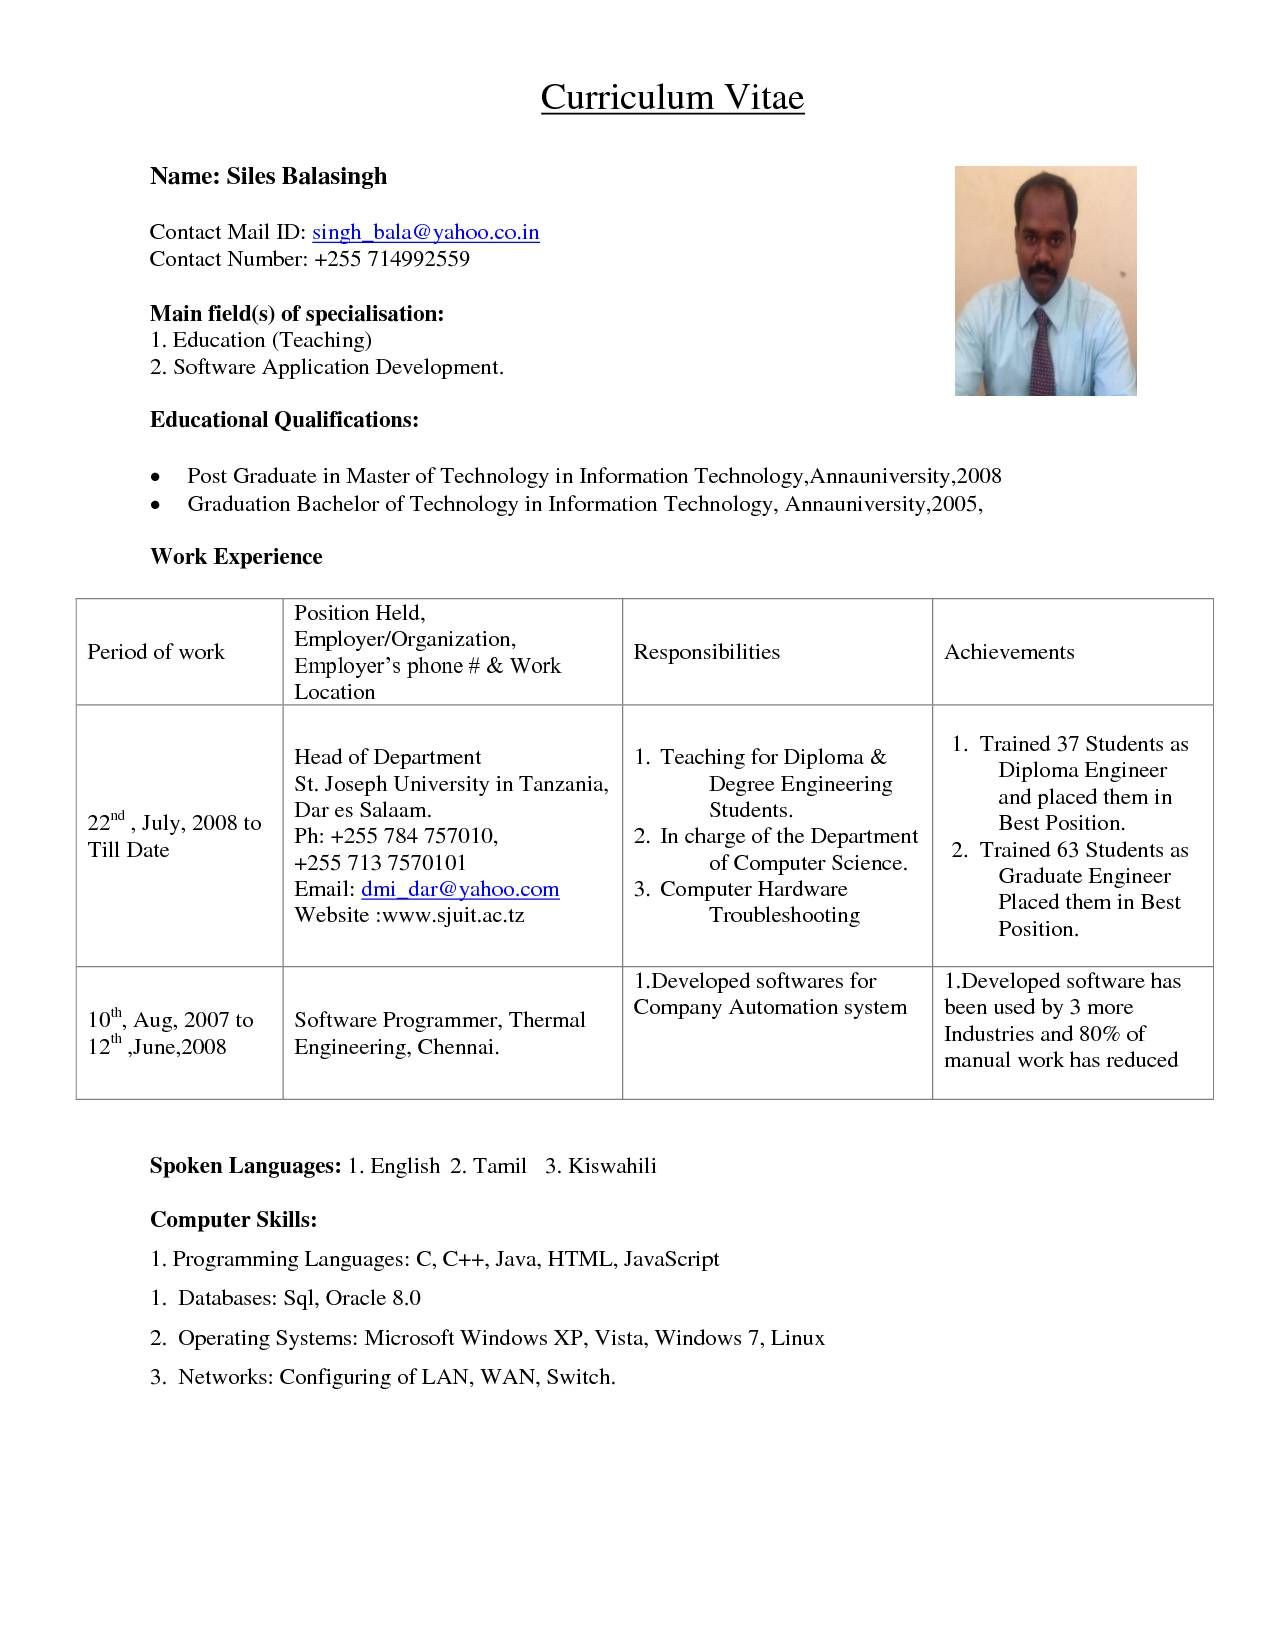 Sample Resume for assistant Professor In Mechanical Engineering Resume format for Lecturer Job In Engineering College